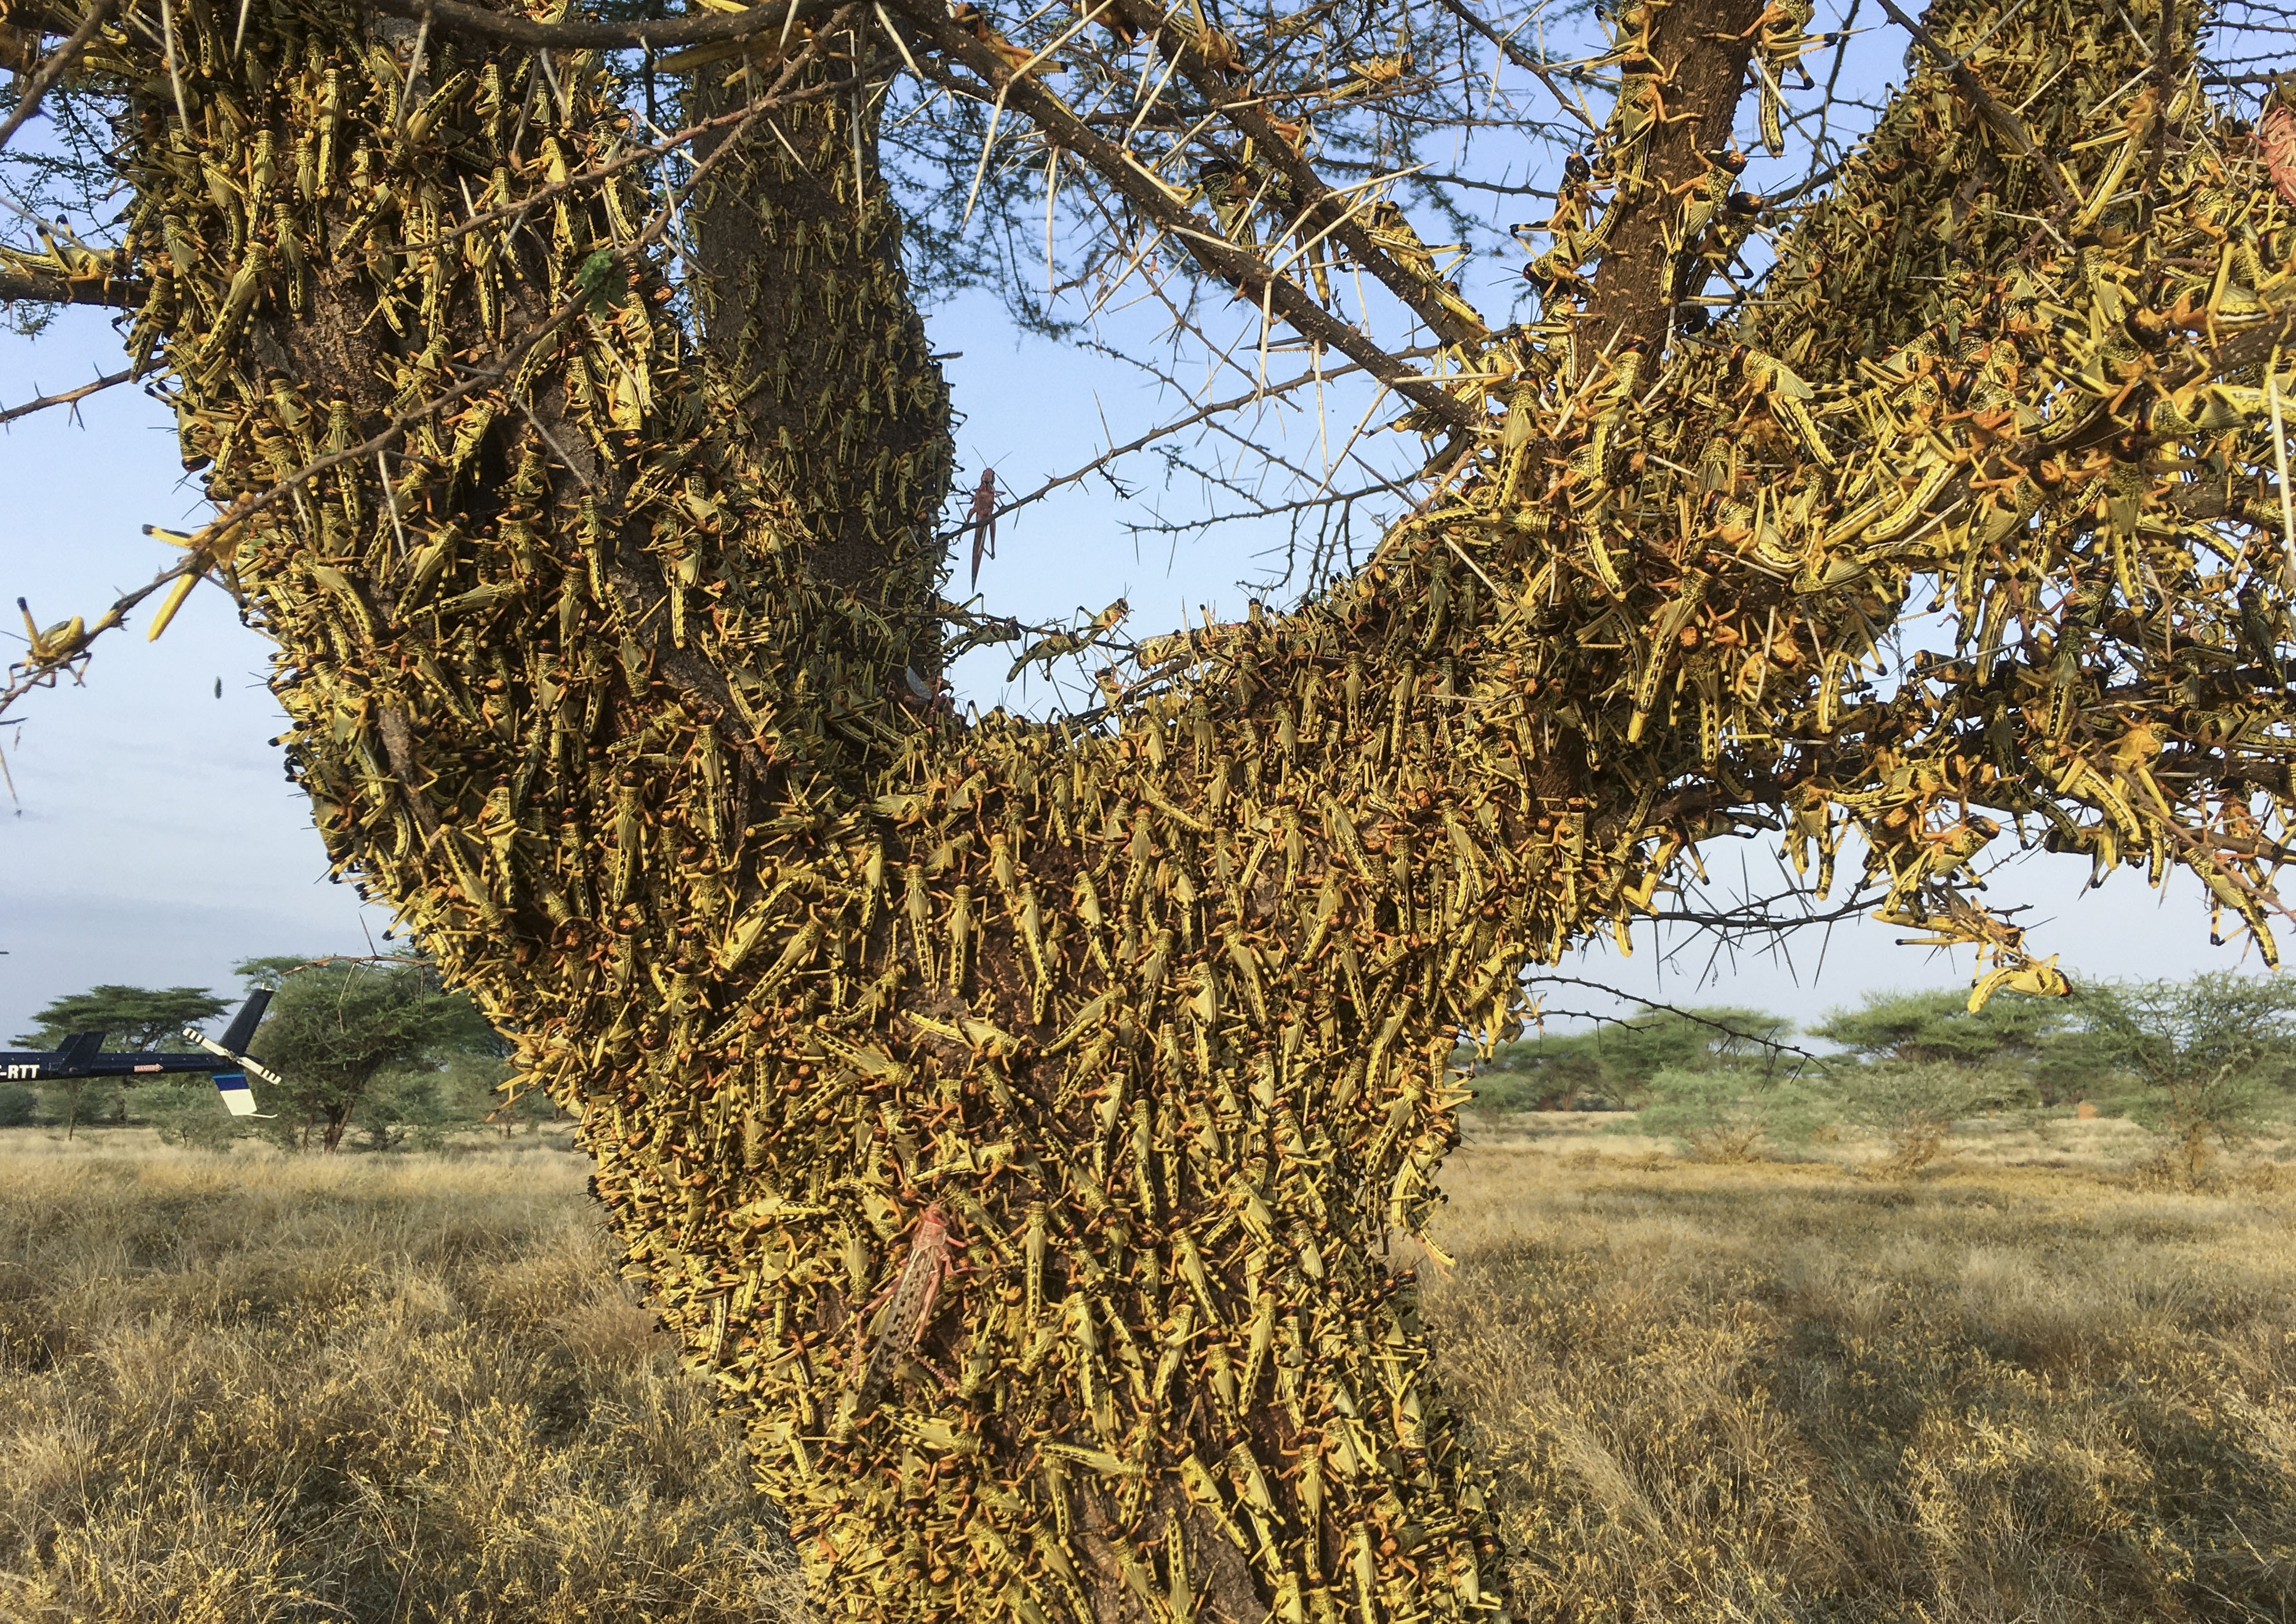 Locusts swarm on a tree south of Lodwar town in Turkana county, northern Kenya Tuesday, June 23, 2020. The worst outbreak of the voracious insects in Kenya in 70 years is far from over, and their newest generation is now finding its wings for proper flight. Photo: AP